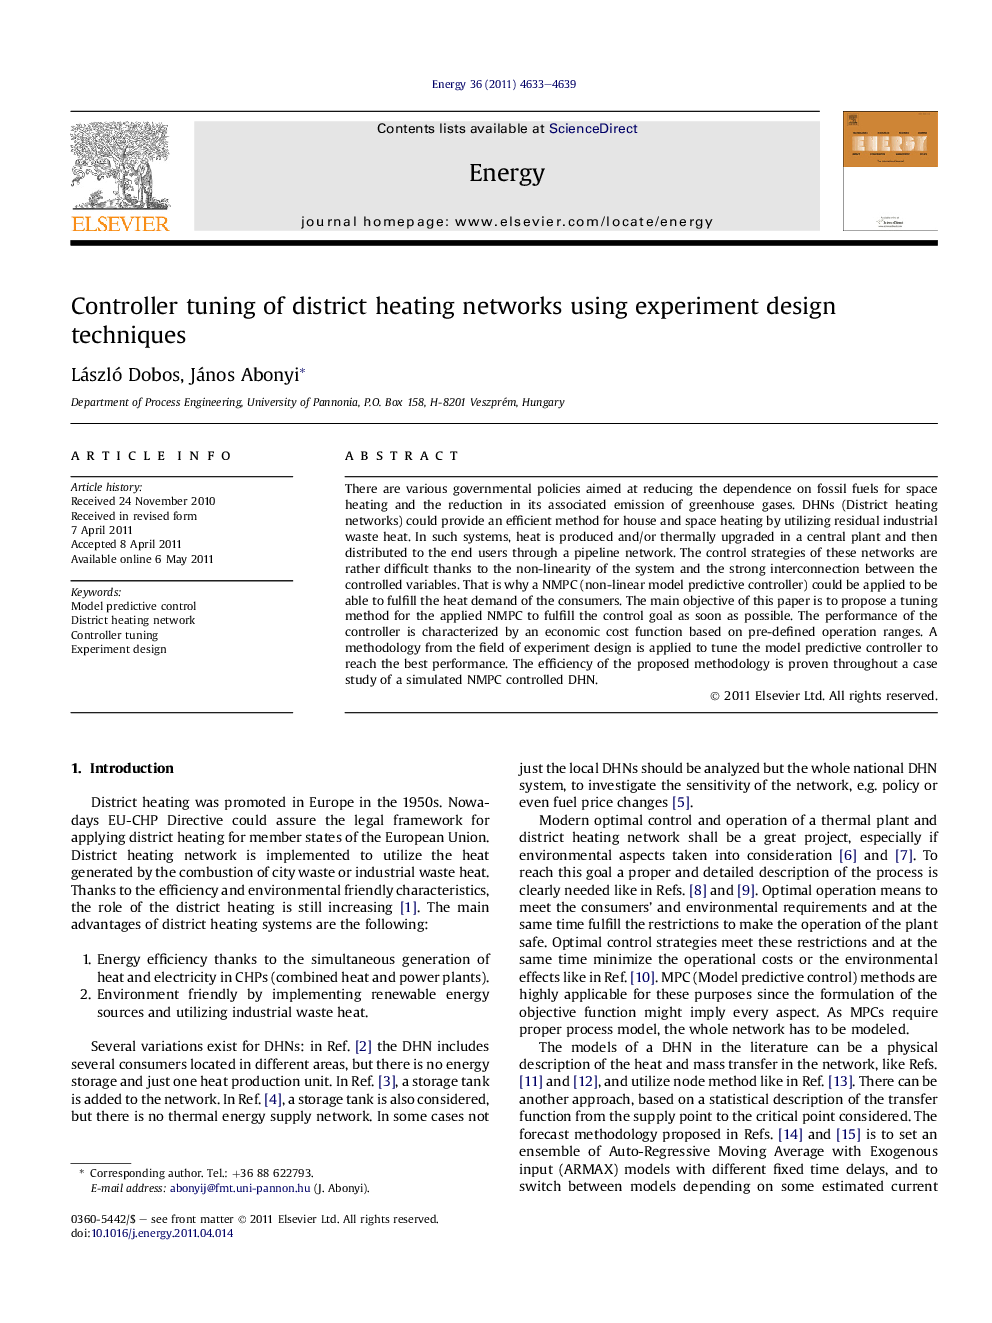 Controller tuning of district heating networks using experiment design techniques